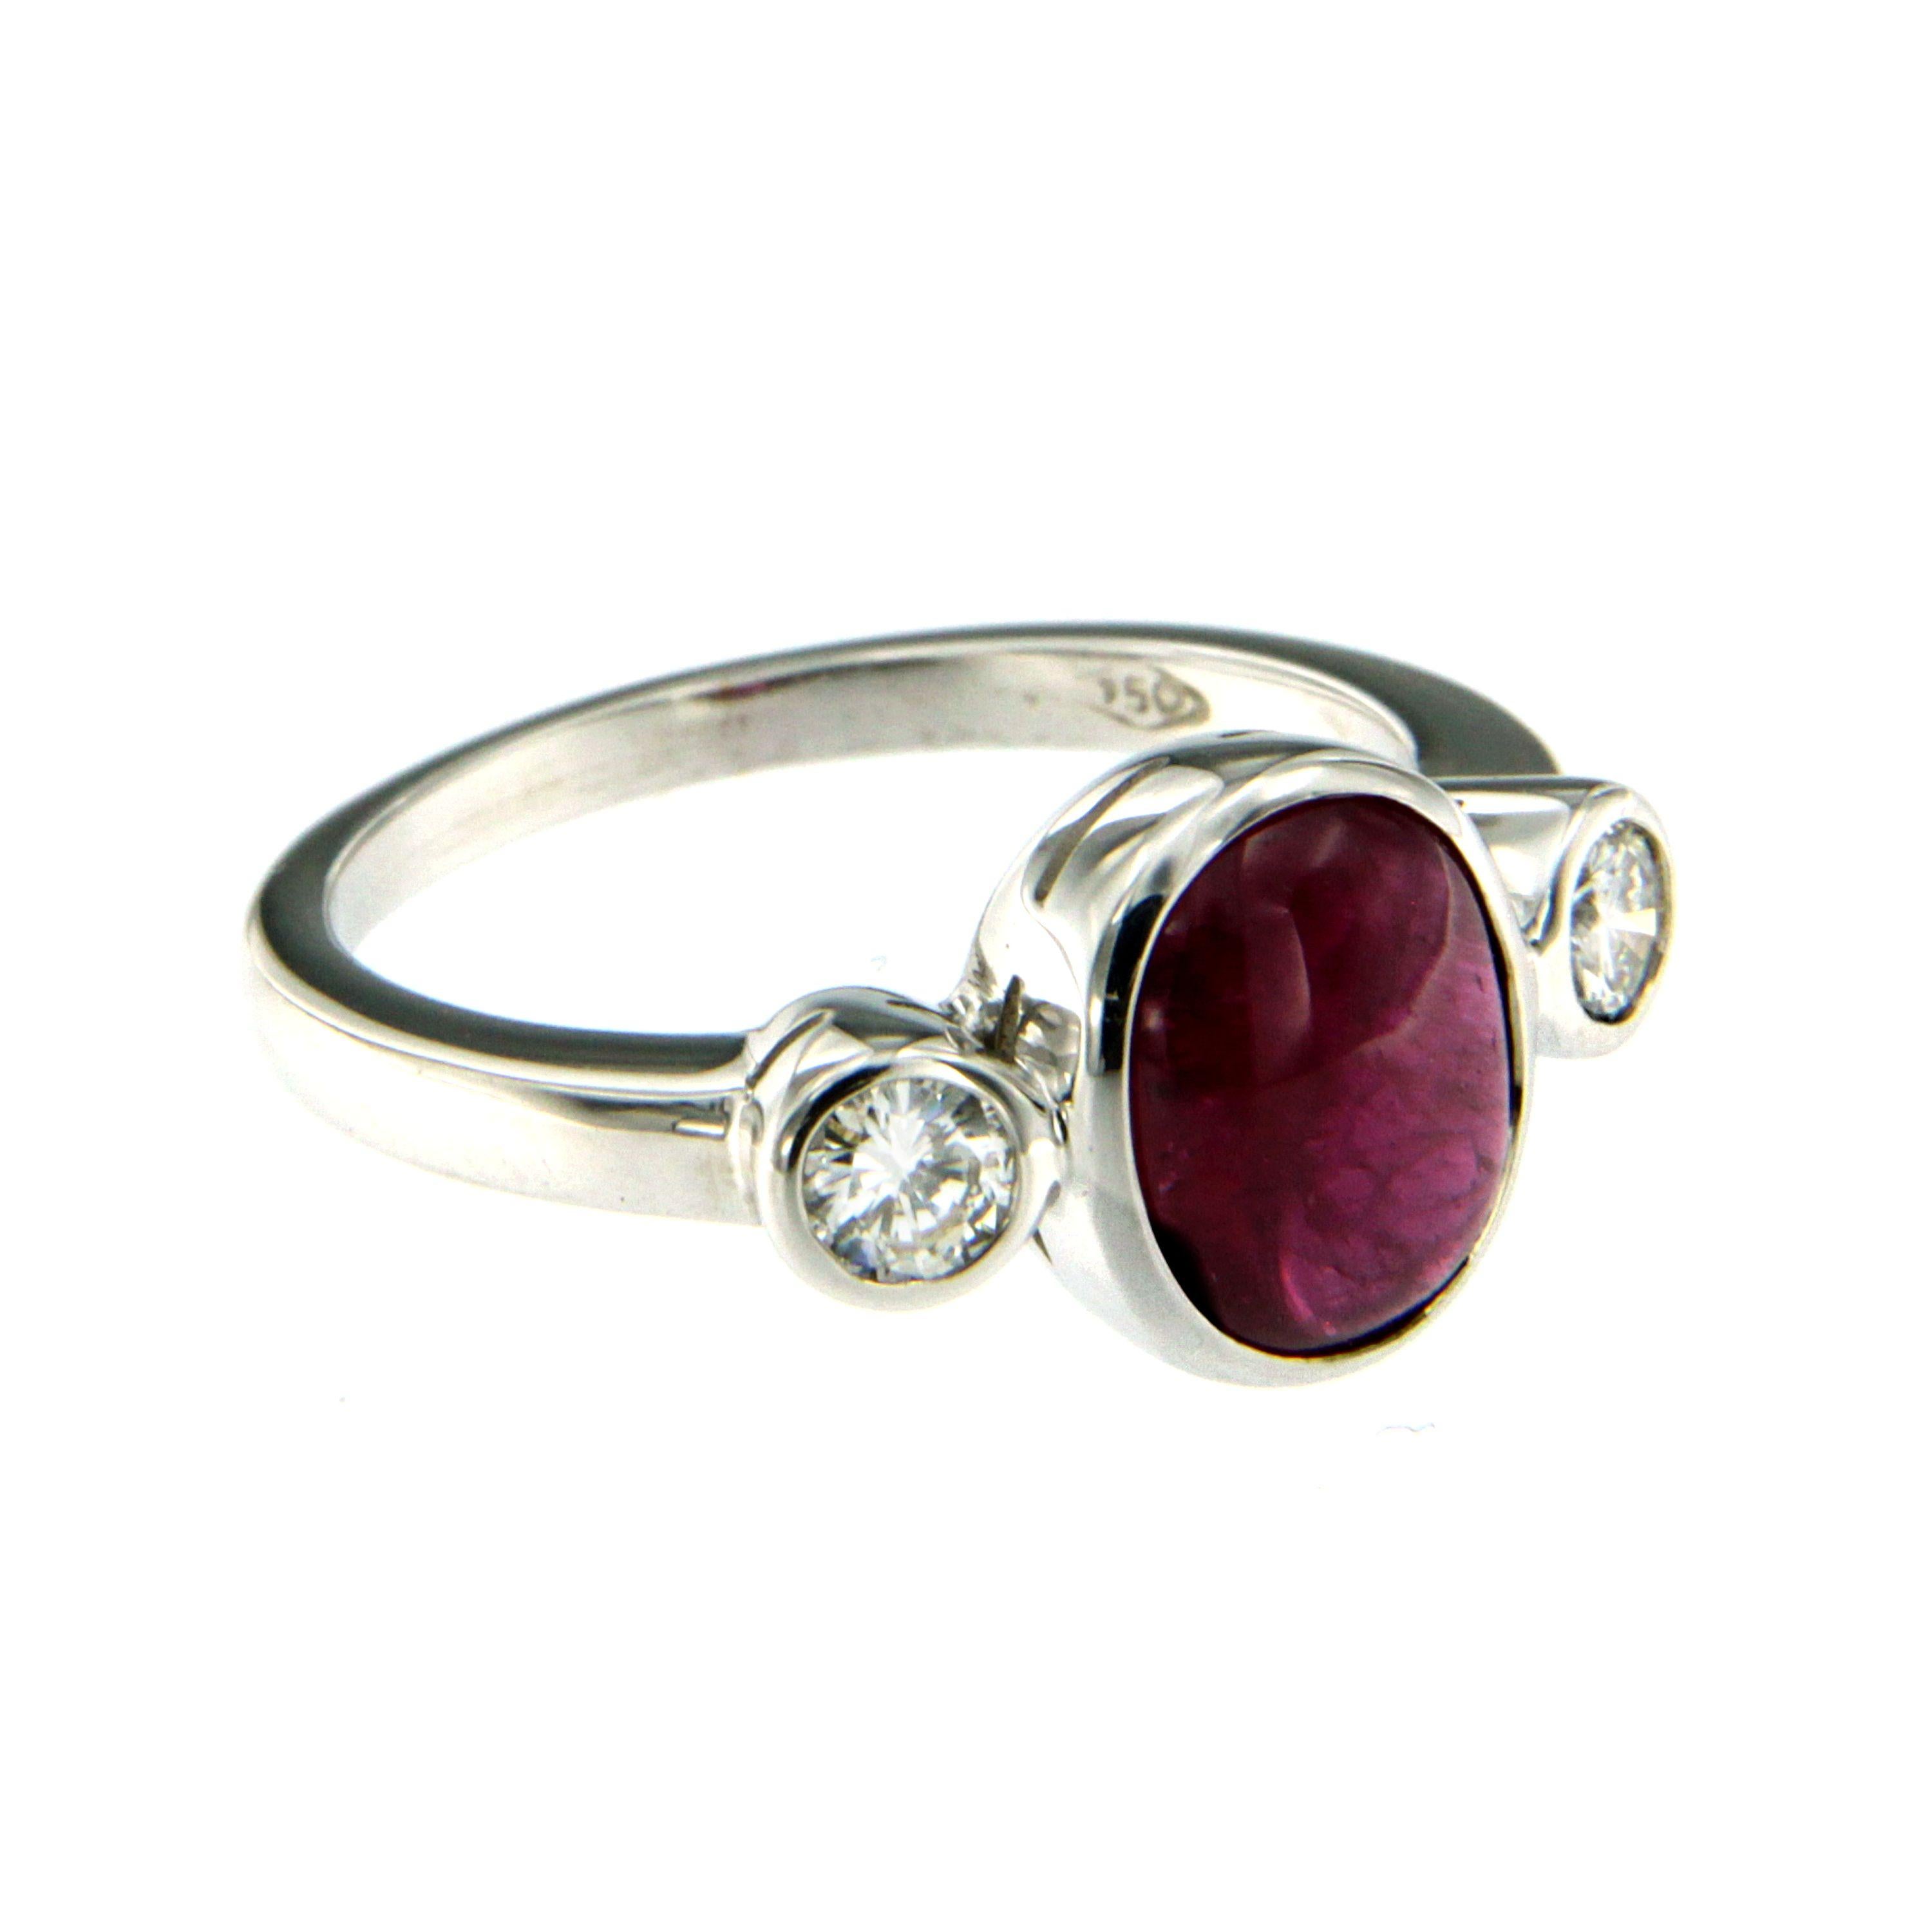 18k white Gold three stone ring containing one oval cut cabochon Ruby weighing 2.00 carat flanked by two round brilliant cut diamonds weighing 0.40 total cts G color vvs clarity. Circa 1960

Ring Size: US 6.5 - IT 13 - FR 53 - UK N 
This ring may be